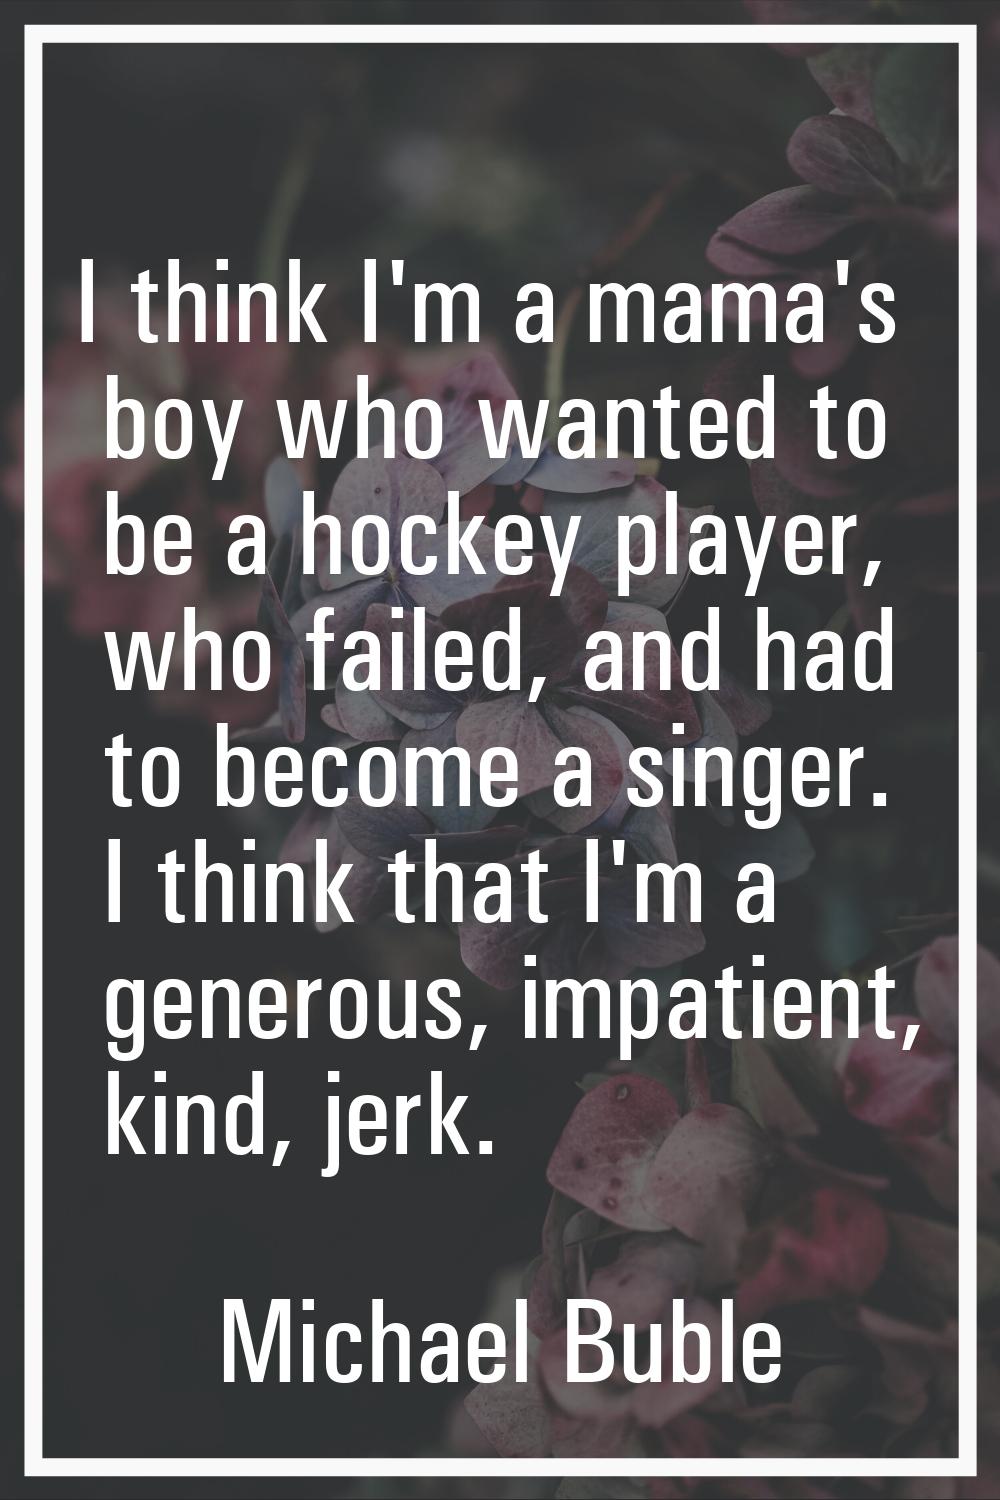 I think I'm a mama's boy who wanted to be a hockey player, who failed, and had to become a singer. 